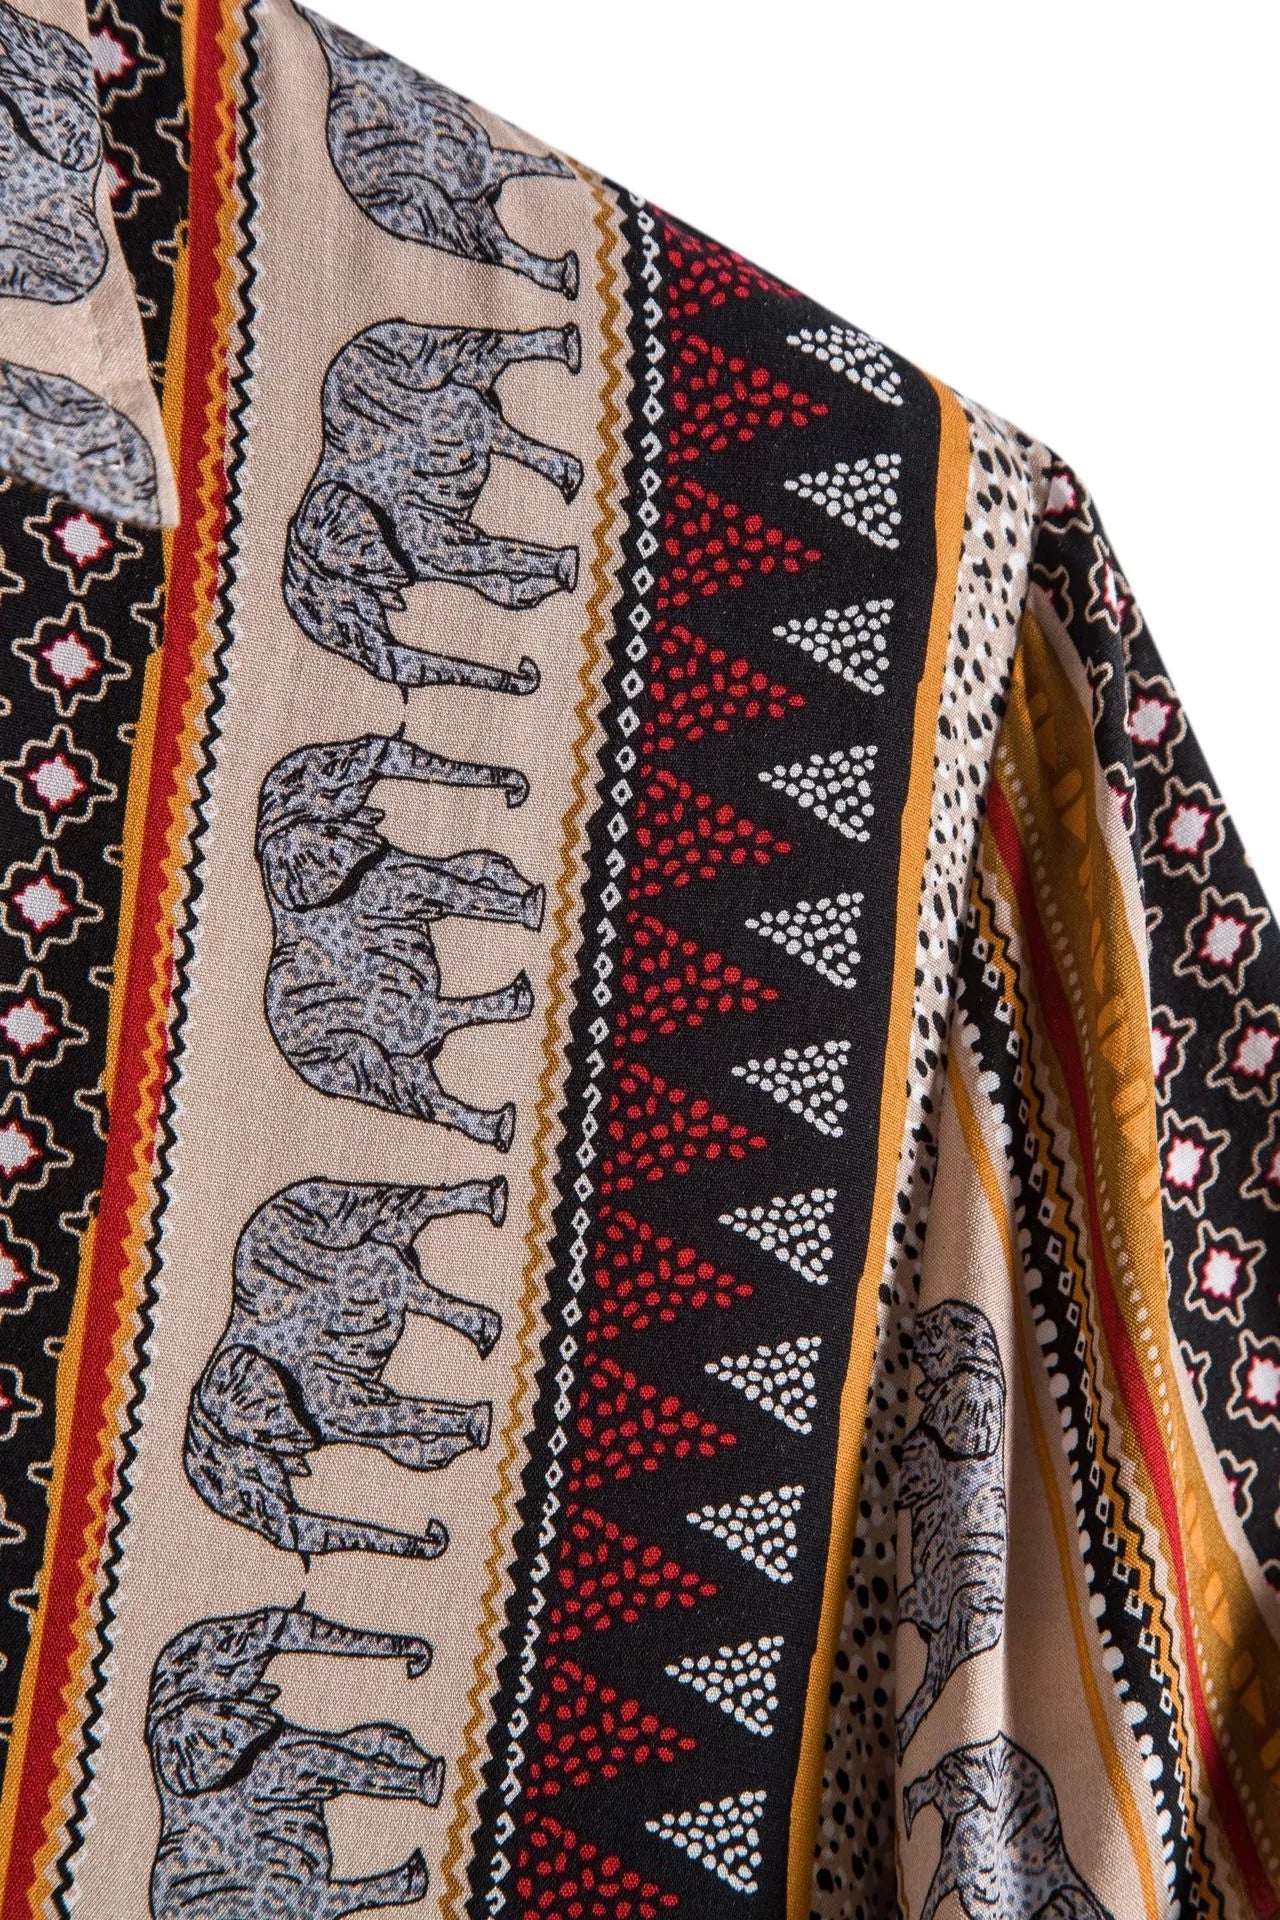 Elephant shirt with geometric print and textured cotton